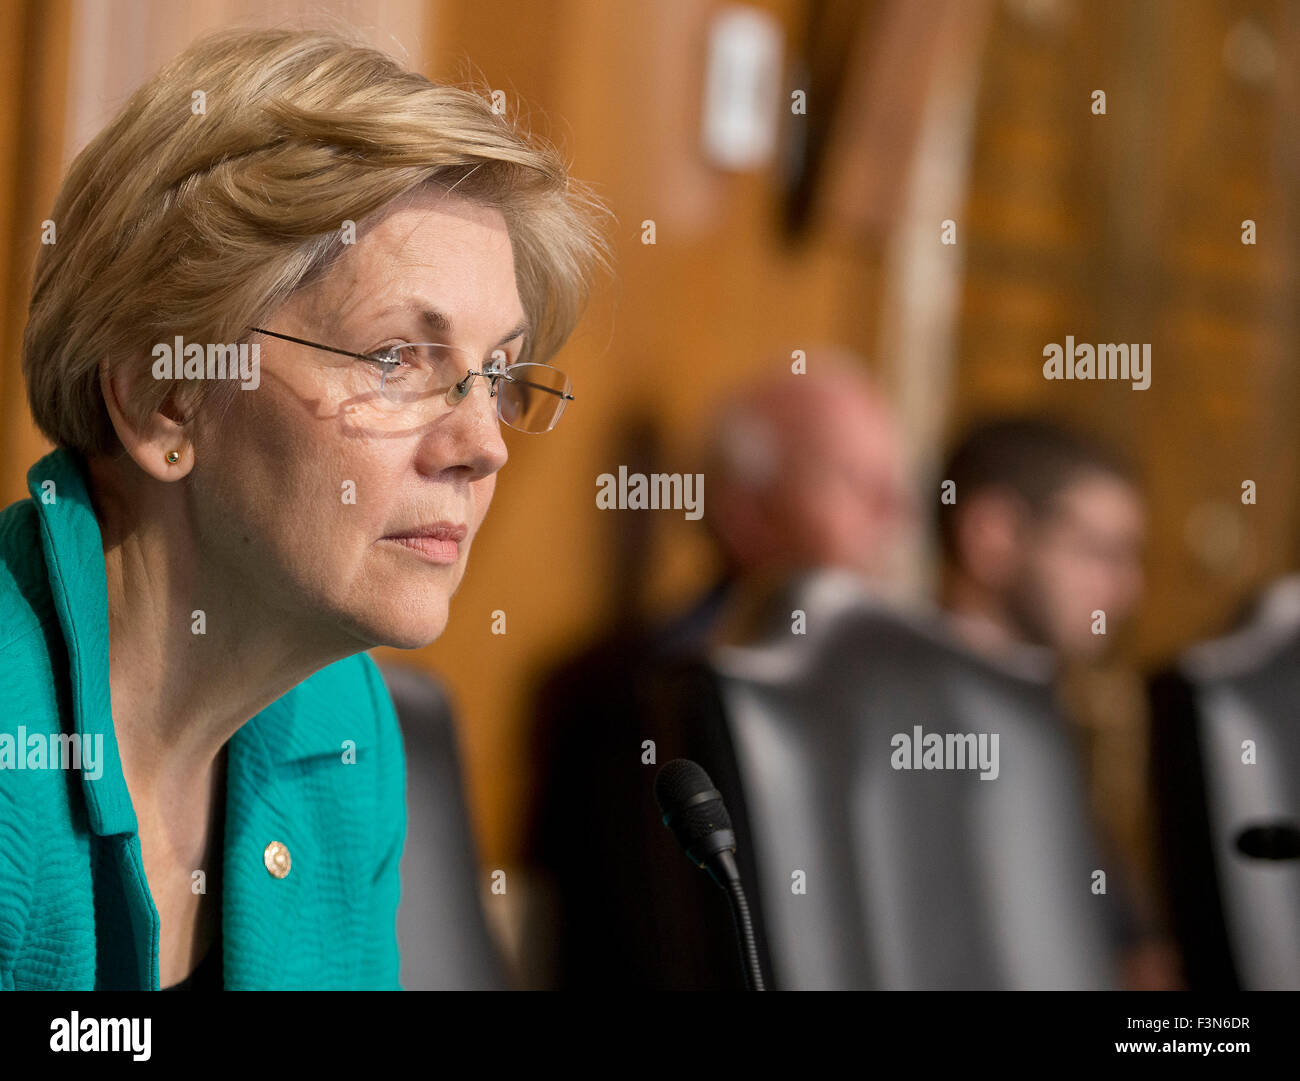 United States Senator Elizabeth Warren (Democrat of Massachusetts) attends a hearing of the US Senate Committee on Energy and Natural Resources on Tuesday, October 6, 2015. Credit: Ron Sachs/CNP - NO WIRE SERVICE - Stock Photo